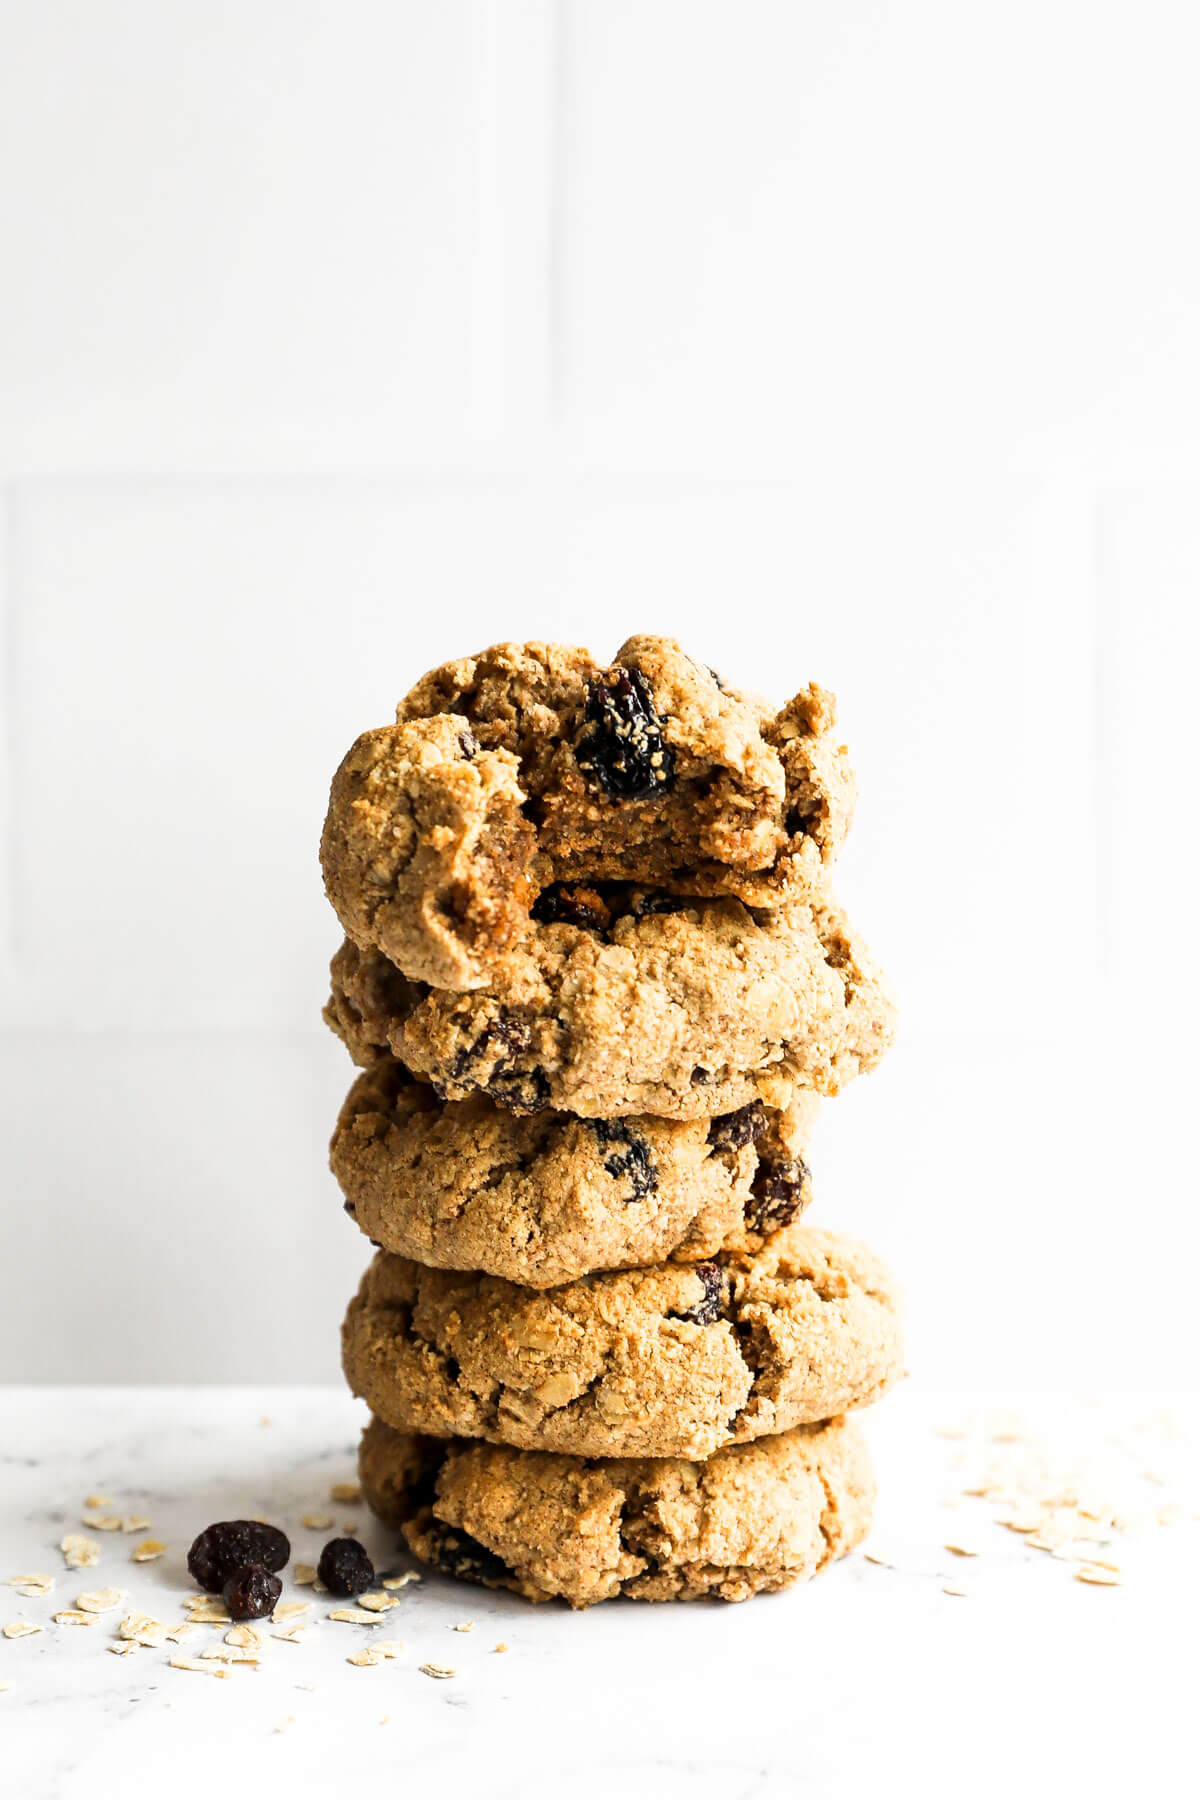 Stack of healthy oatmeal raisin cookies. The top cookie has a bite taken out of it.